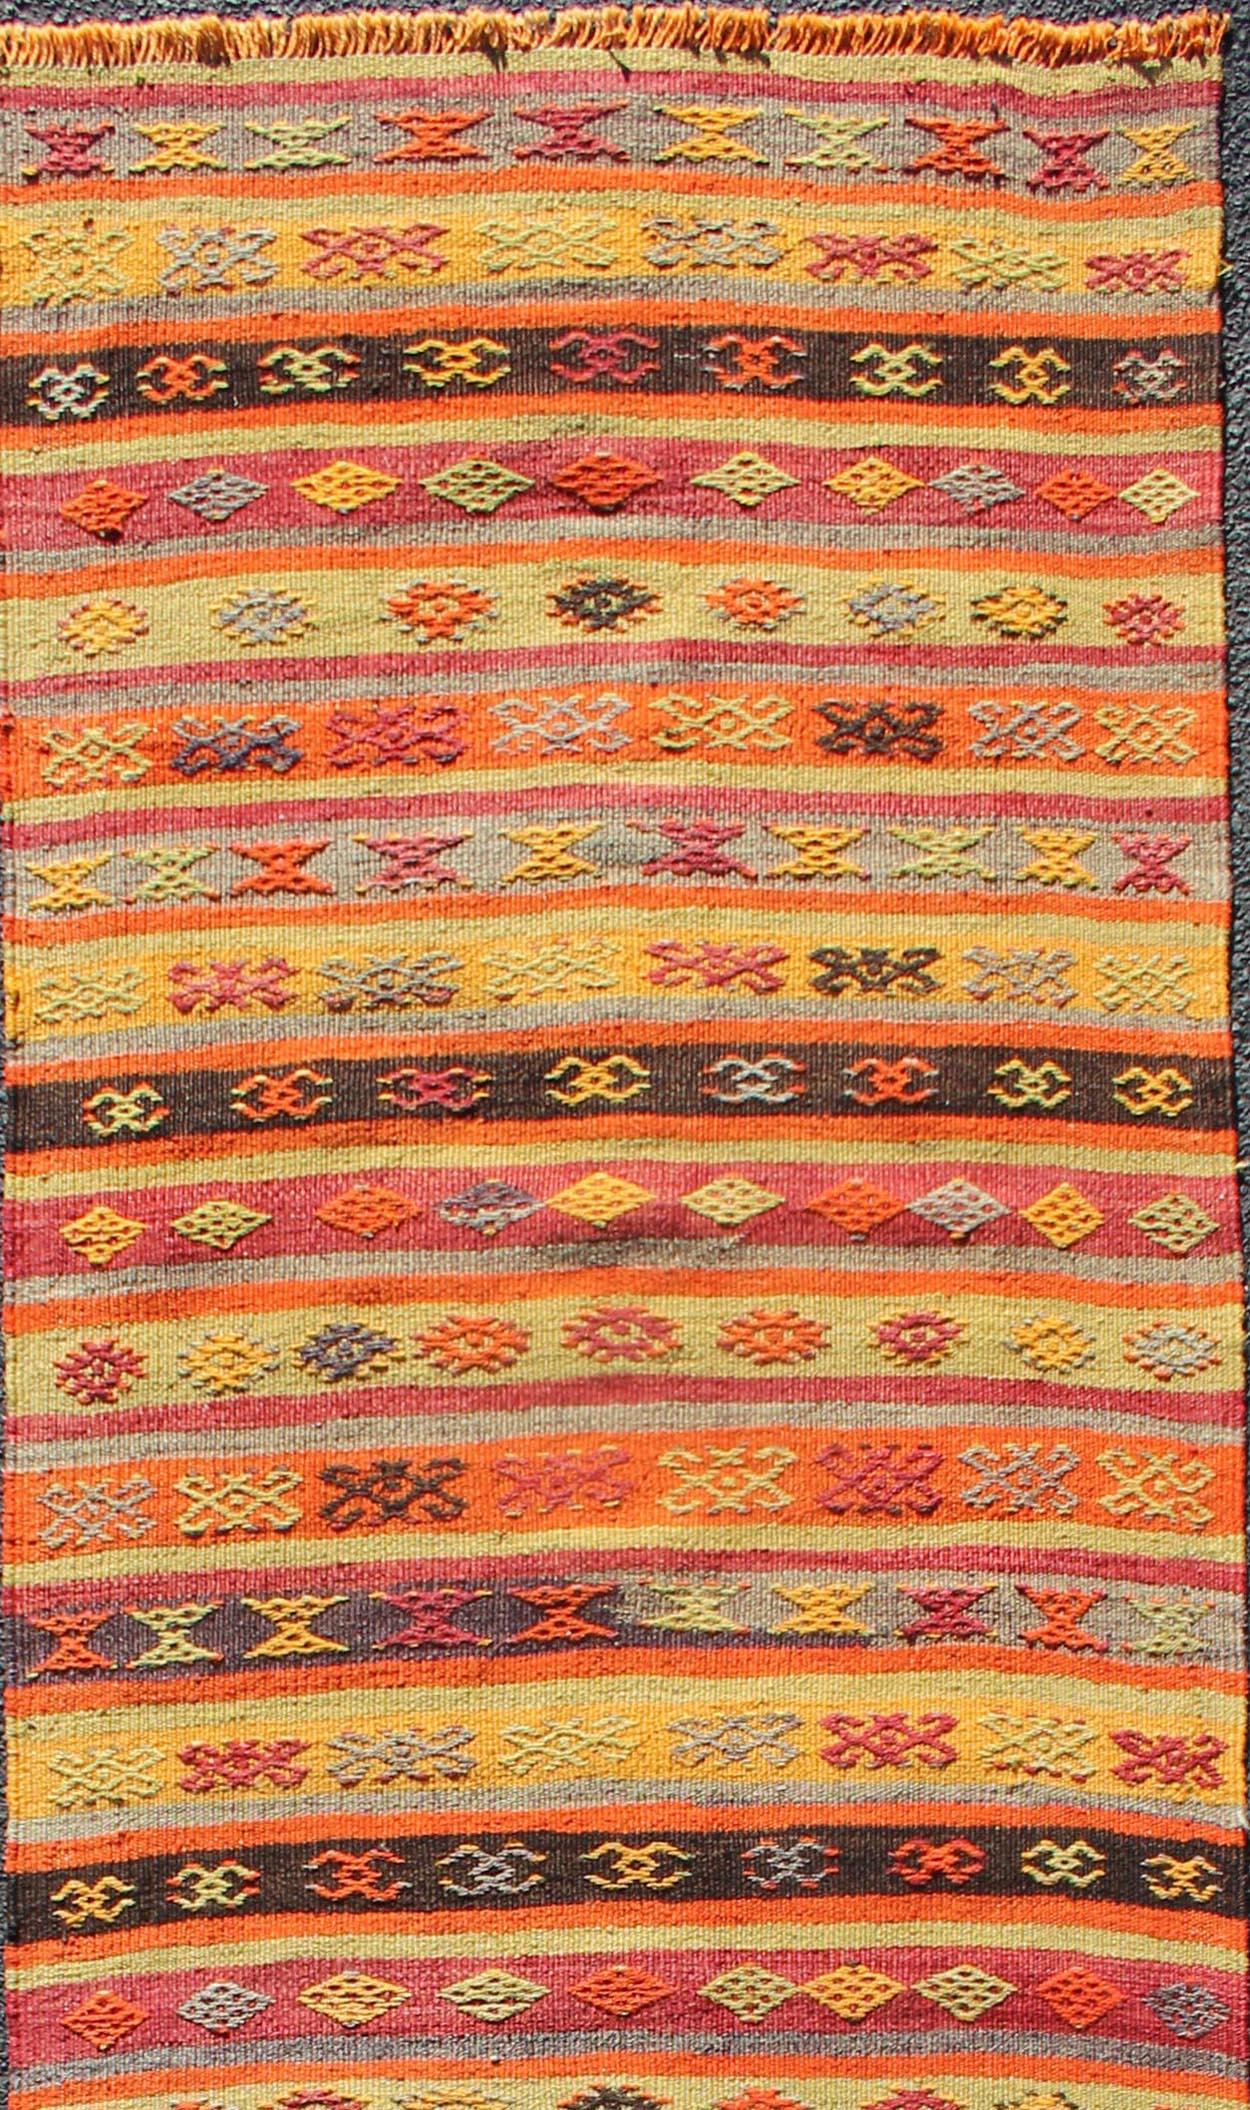 Colorful vintage Turkish Kilim runner with a stripe and modern design, Minimalist stripe design Kilim runner from Turkey, rug TU-NED-602, country of origin / type: Turkey / Kilim, circa 1950

This vintage flat-woven Kilim runner features a